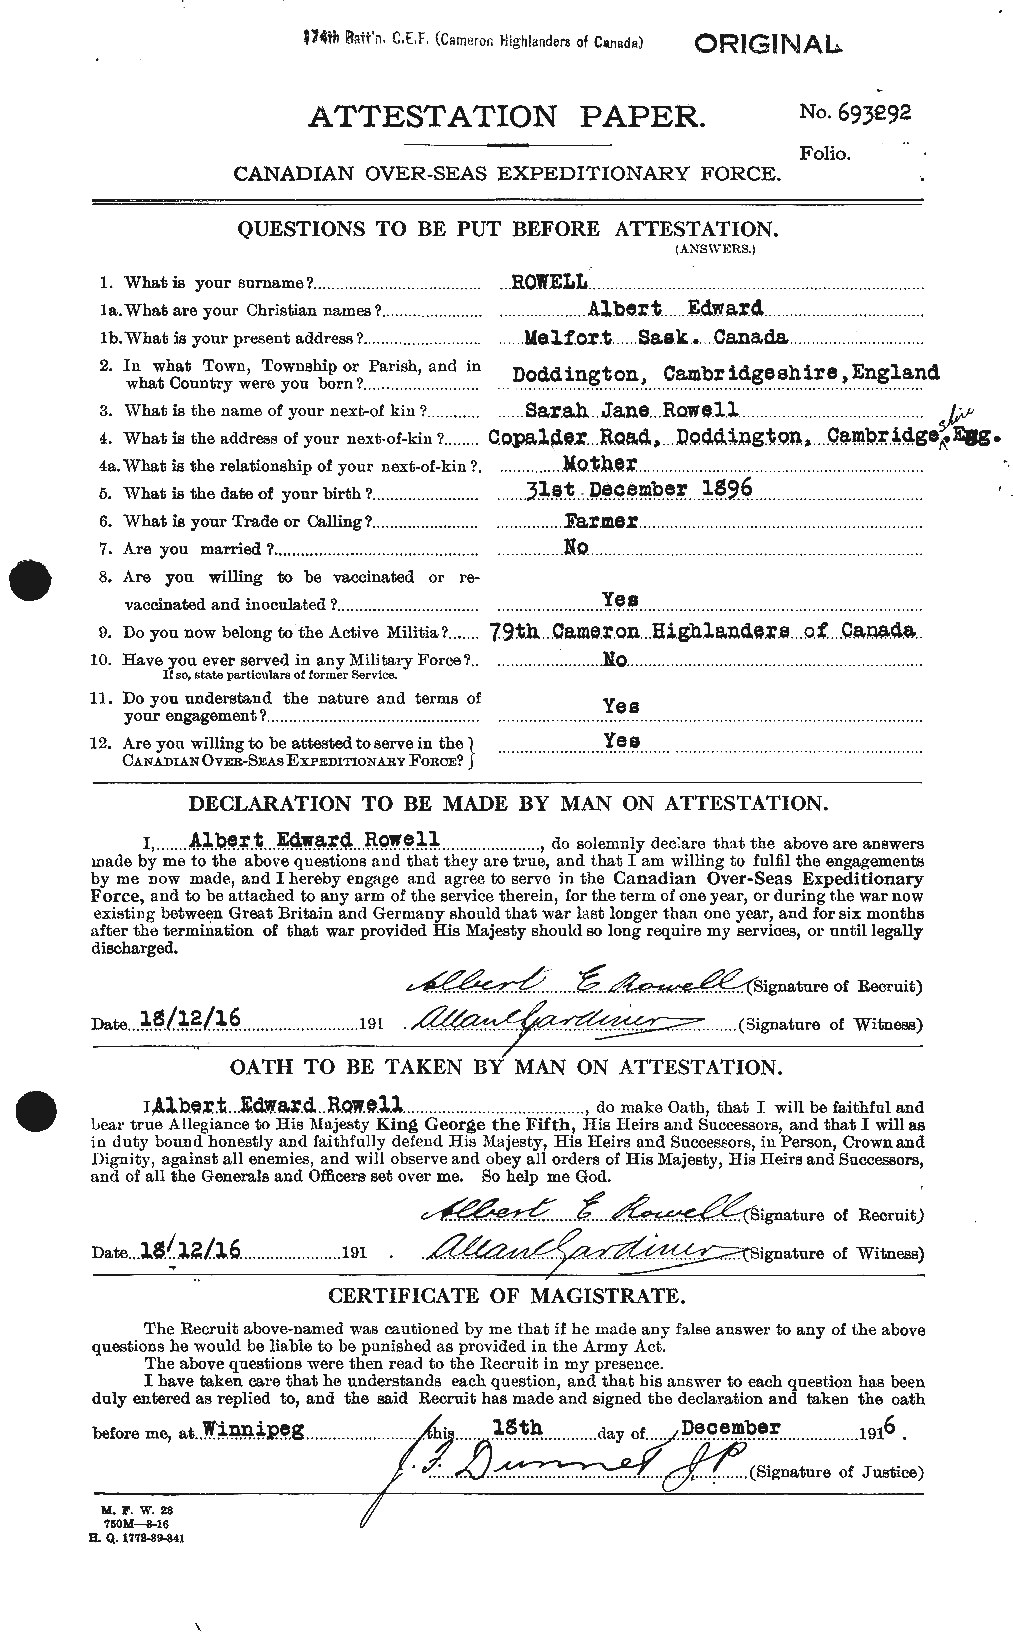 Personnel Records of the First World War - CEF 616048a